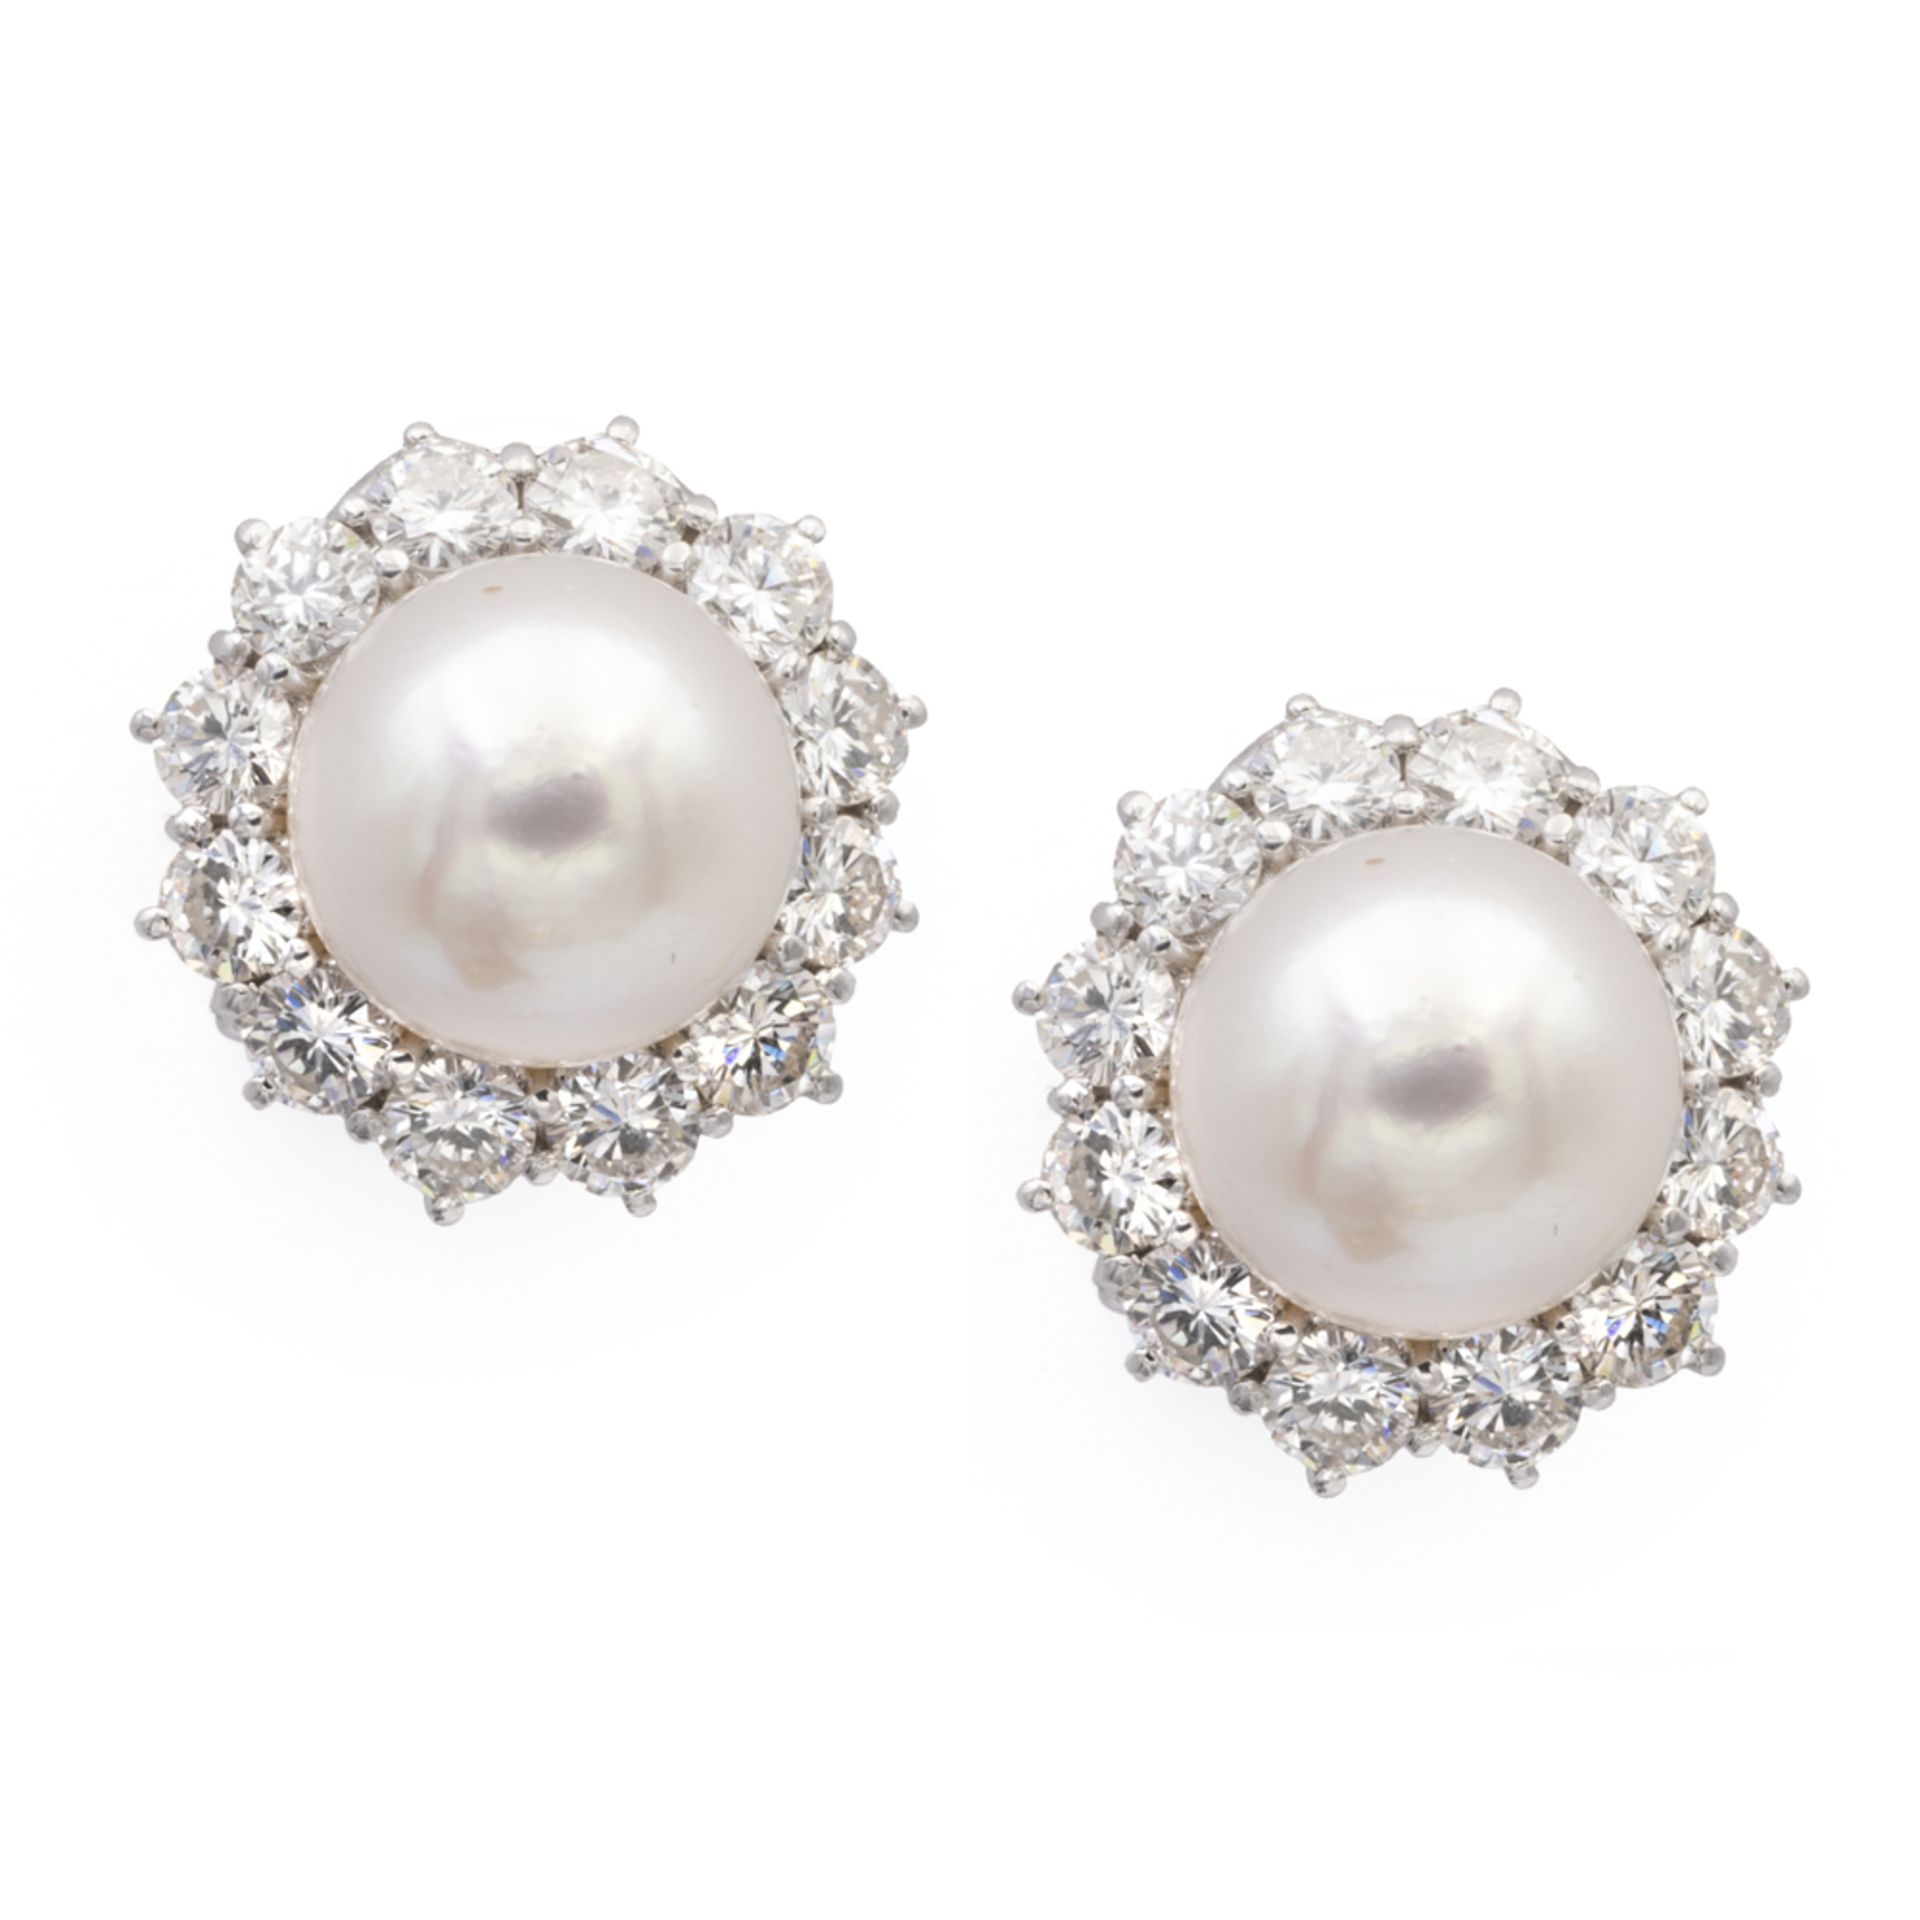 18kt white gold with pearls and diamonds lobe earrings